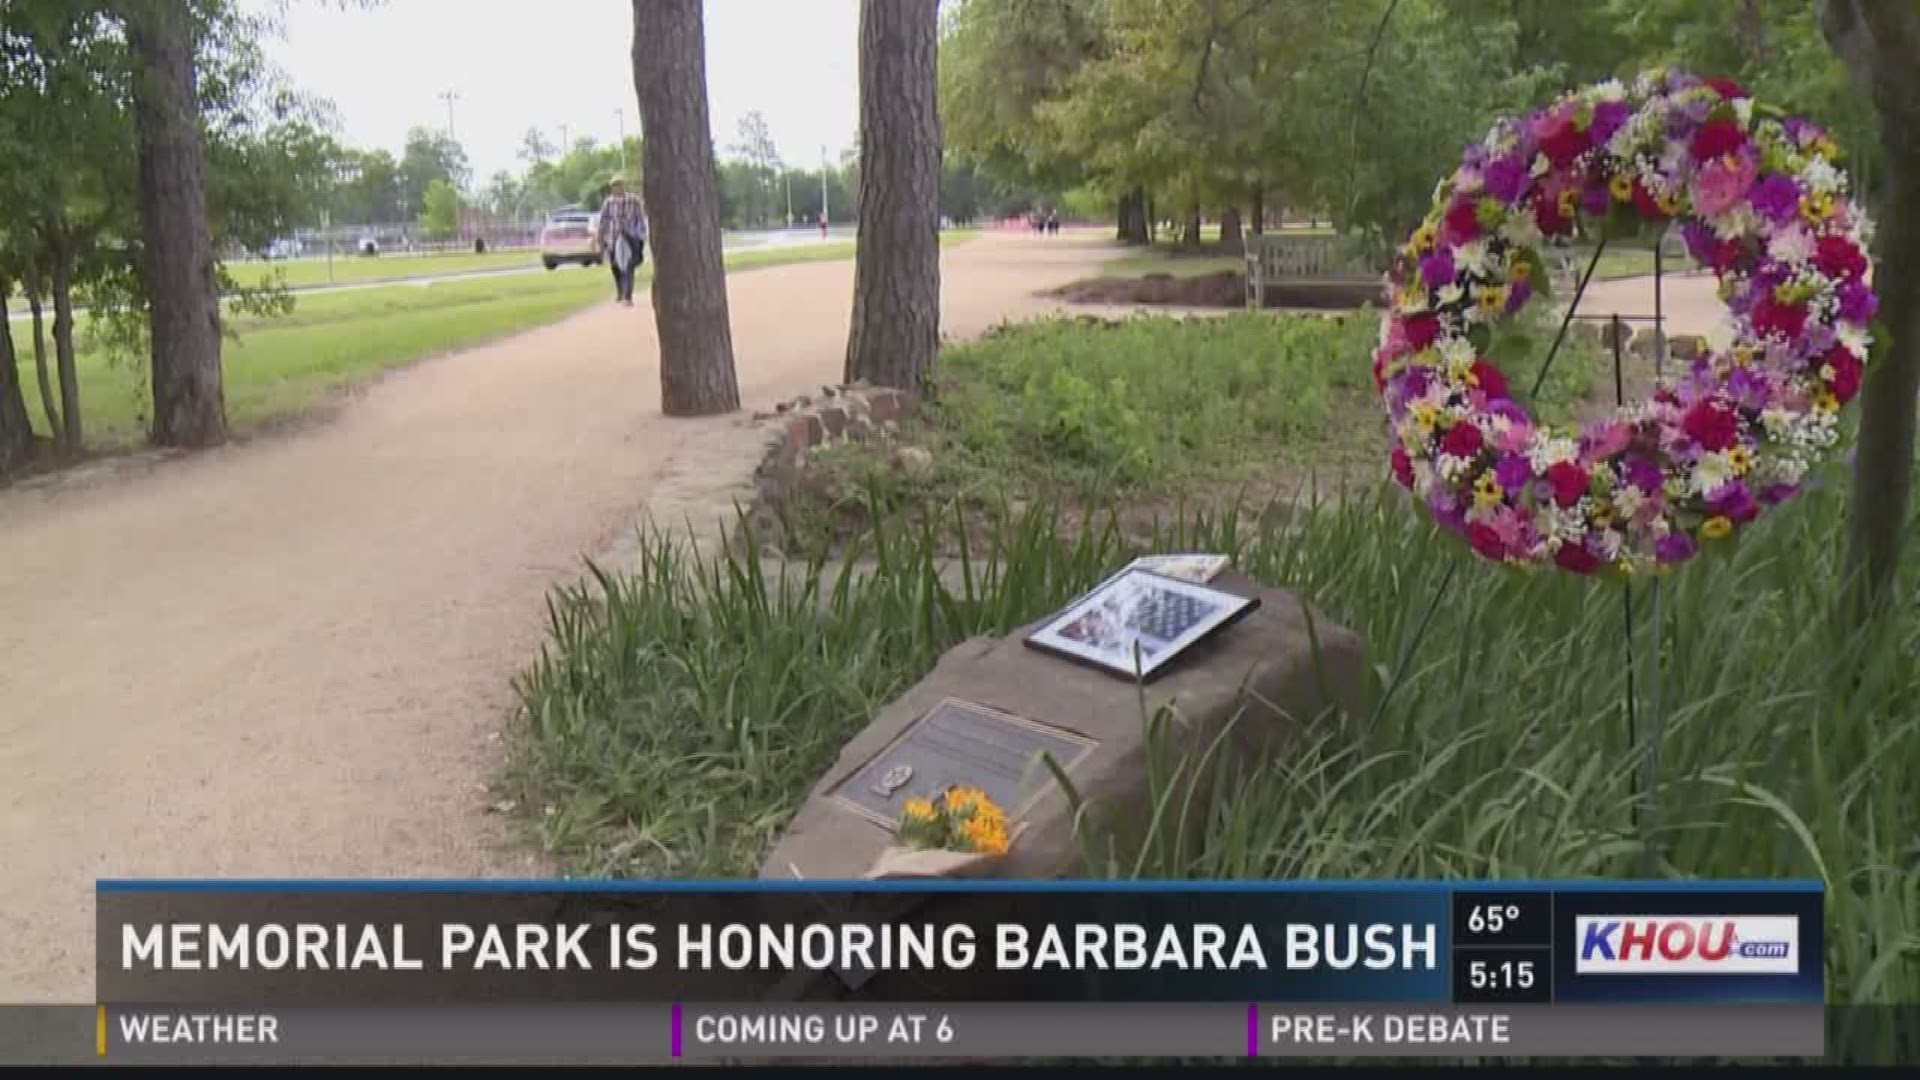 Memorial Park in Houston is honoring former First Lady Barbara Bush with a wreath of flowers in the Bush Grove next to the golf course in the park. 